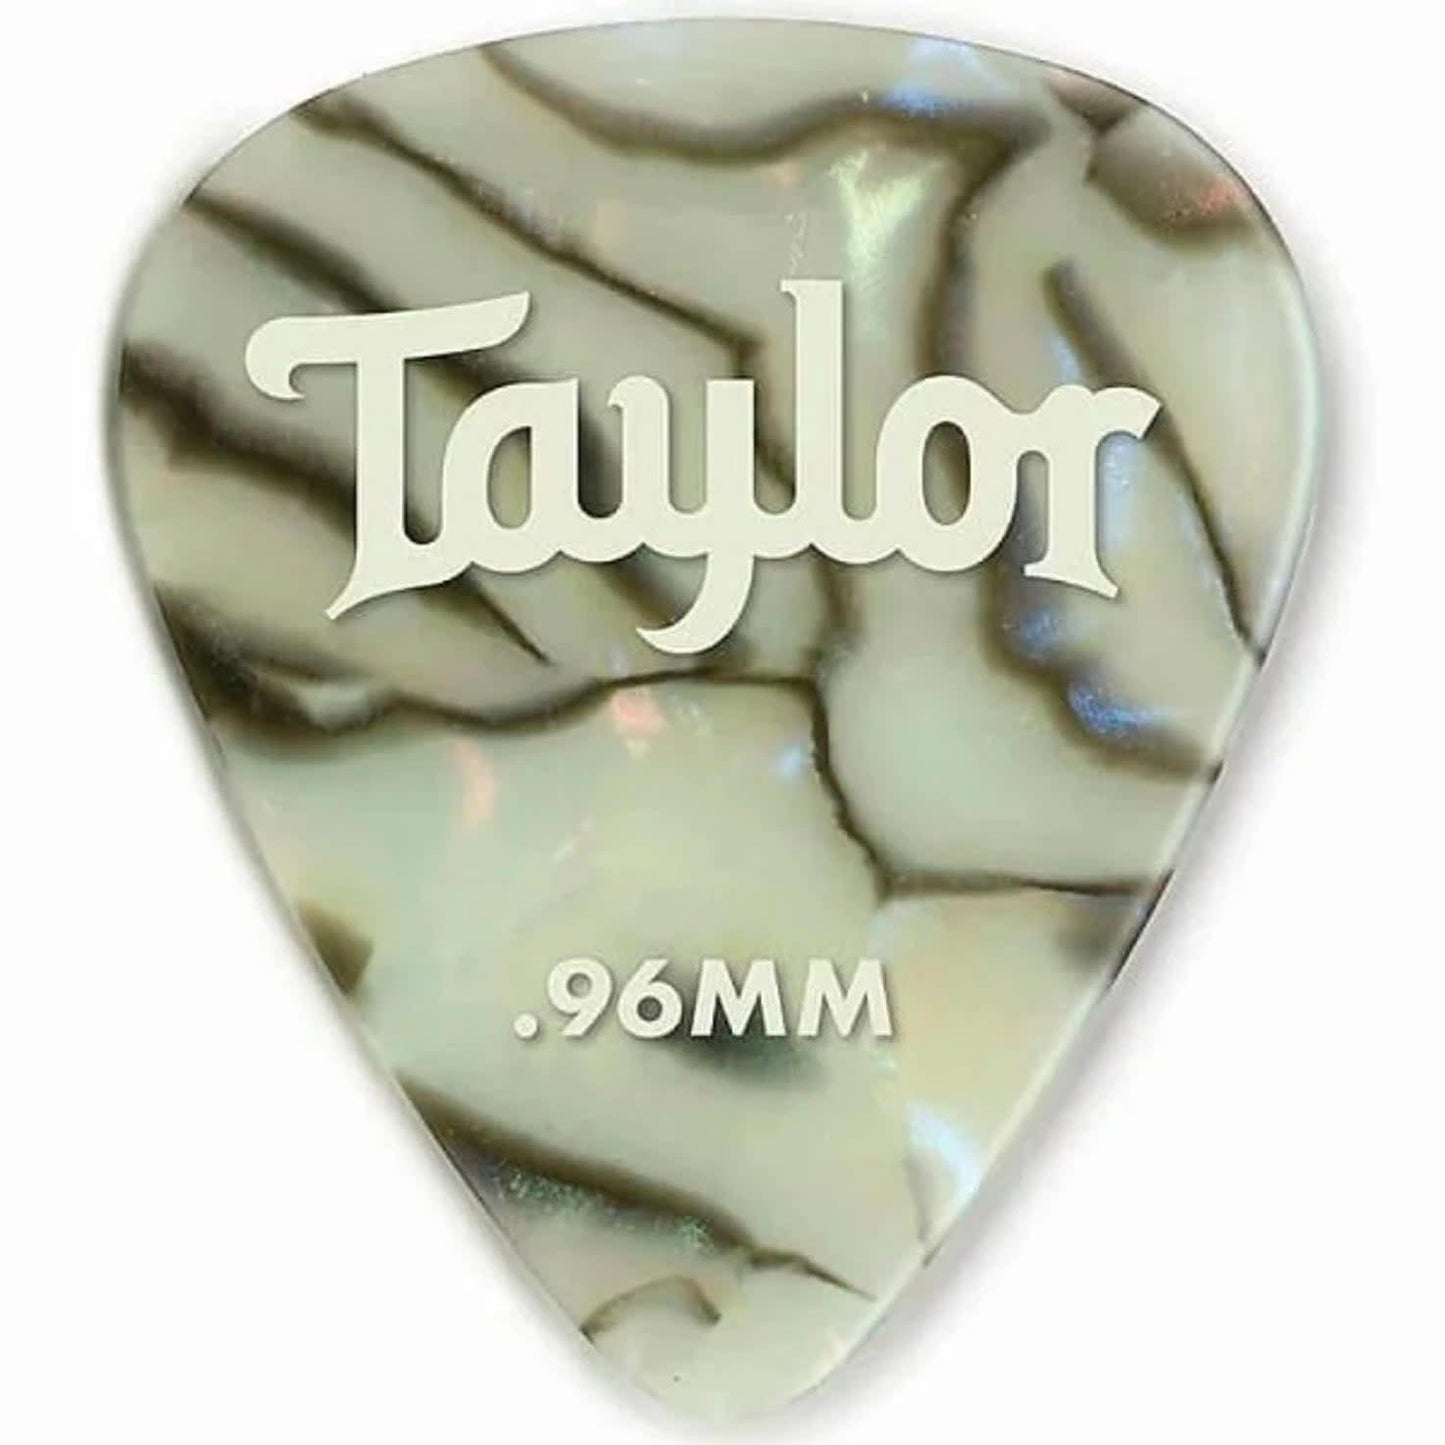 Taylor Celluloid 351 Guitar Picks, Abalone, 12-Pack 1.21mm